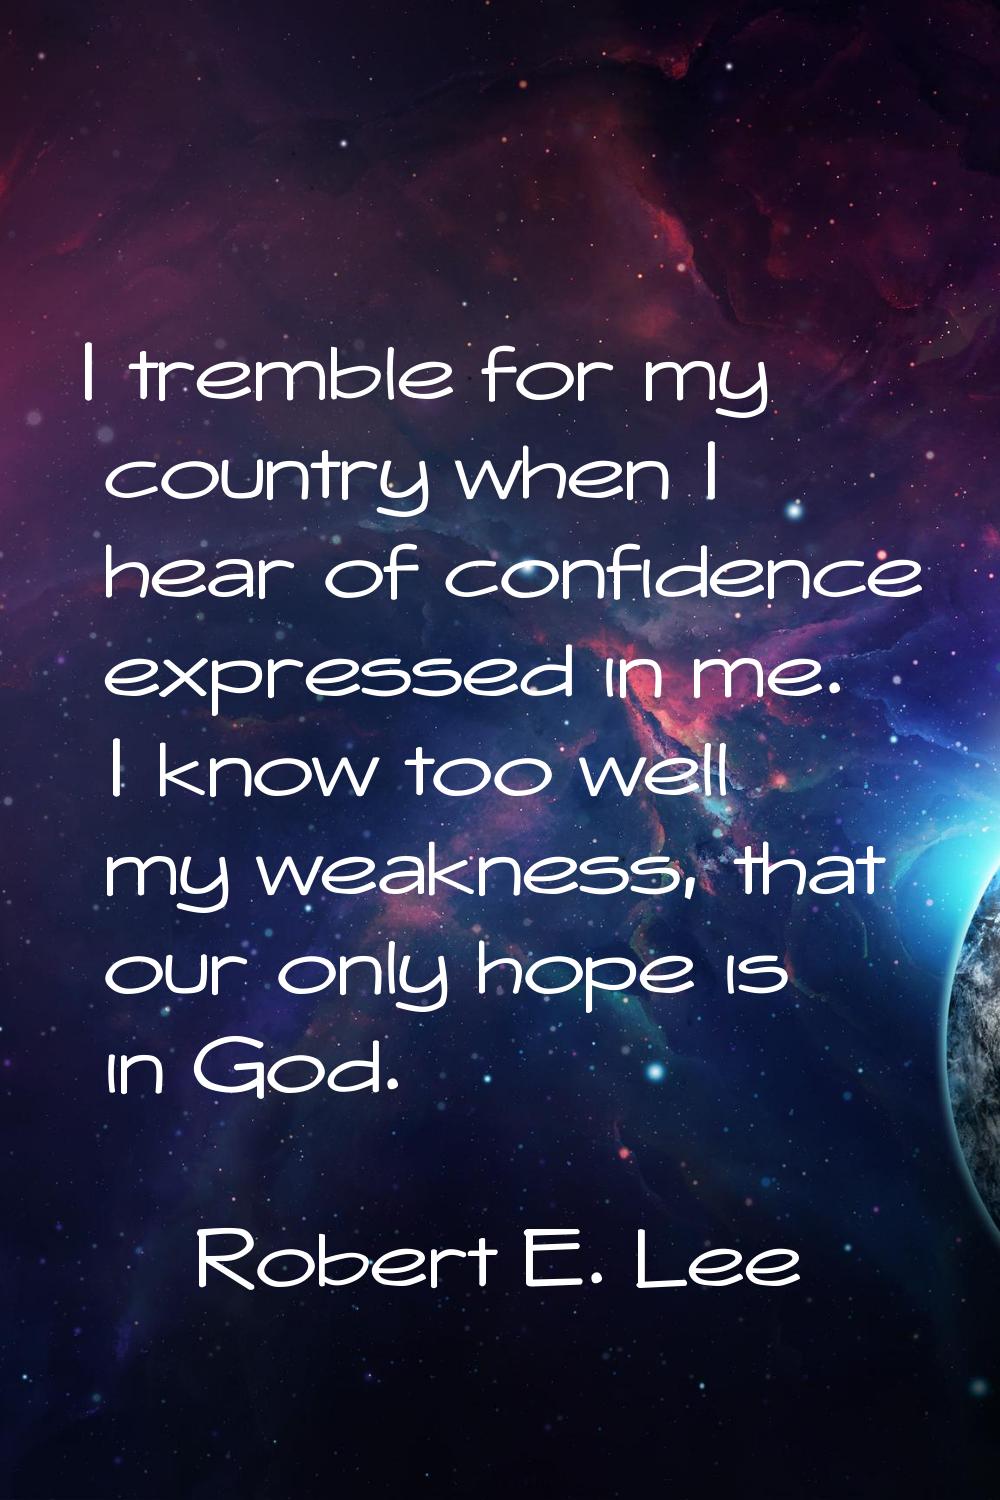 I tremble for my country when I hear of confidence expressed in me. I know too well my weakness, th